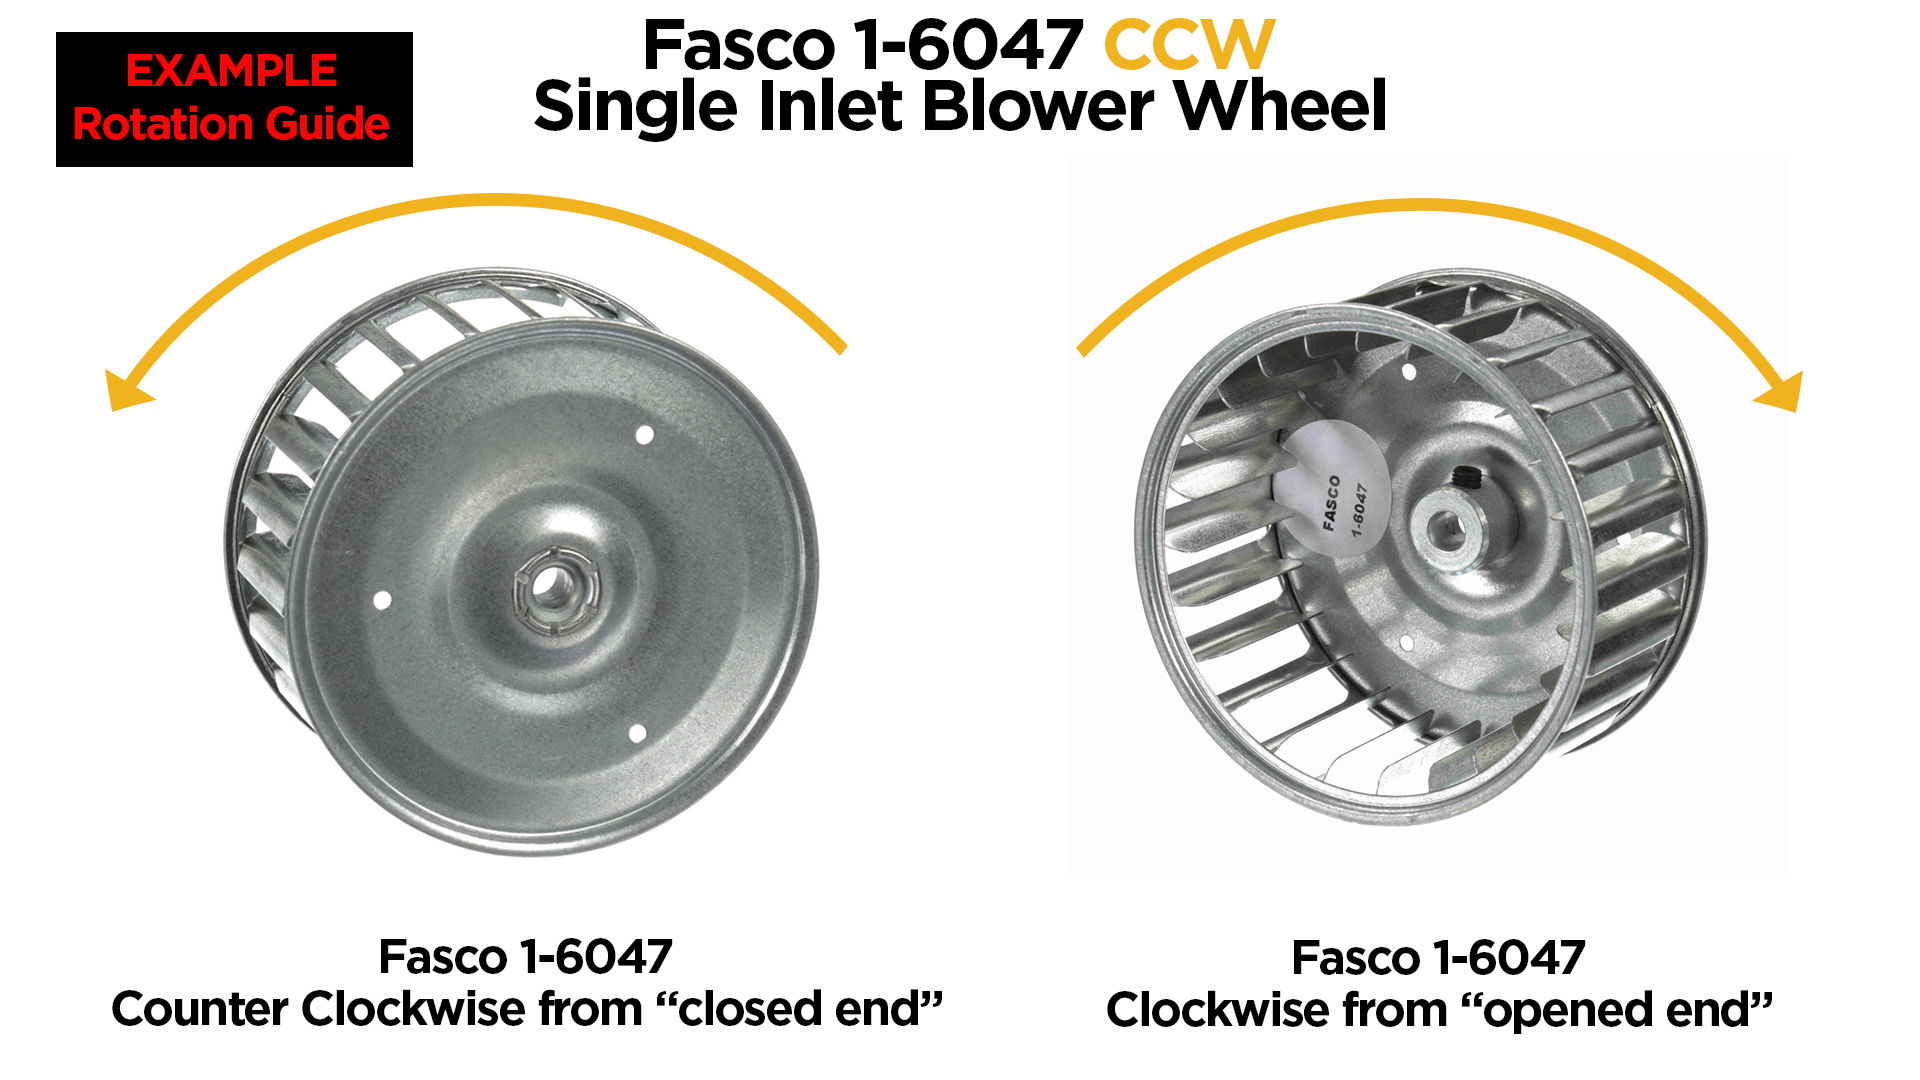 counter clockwise rotation guideline for single inlet blower wheel